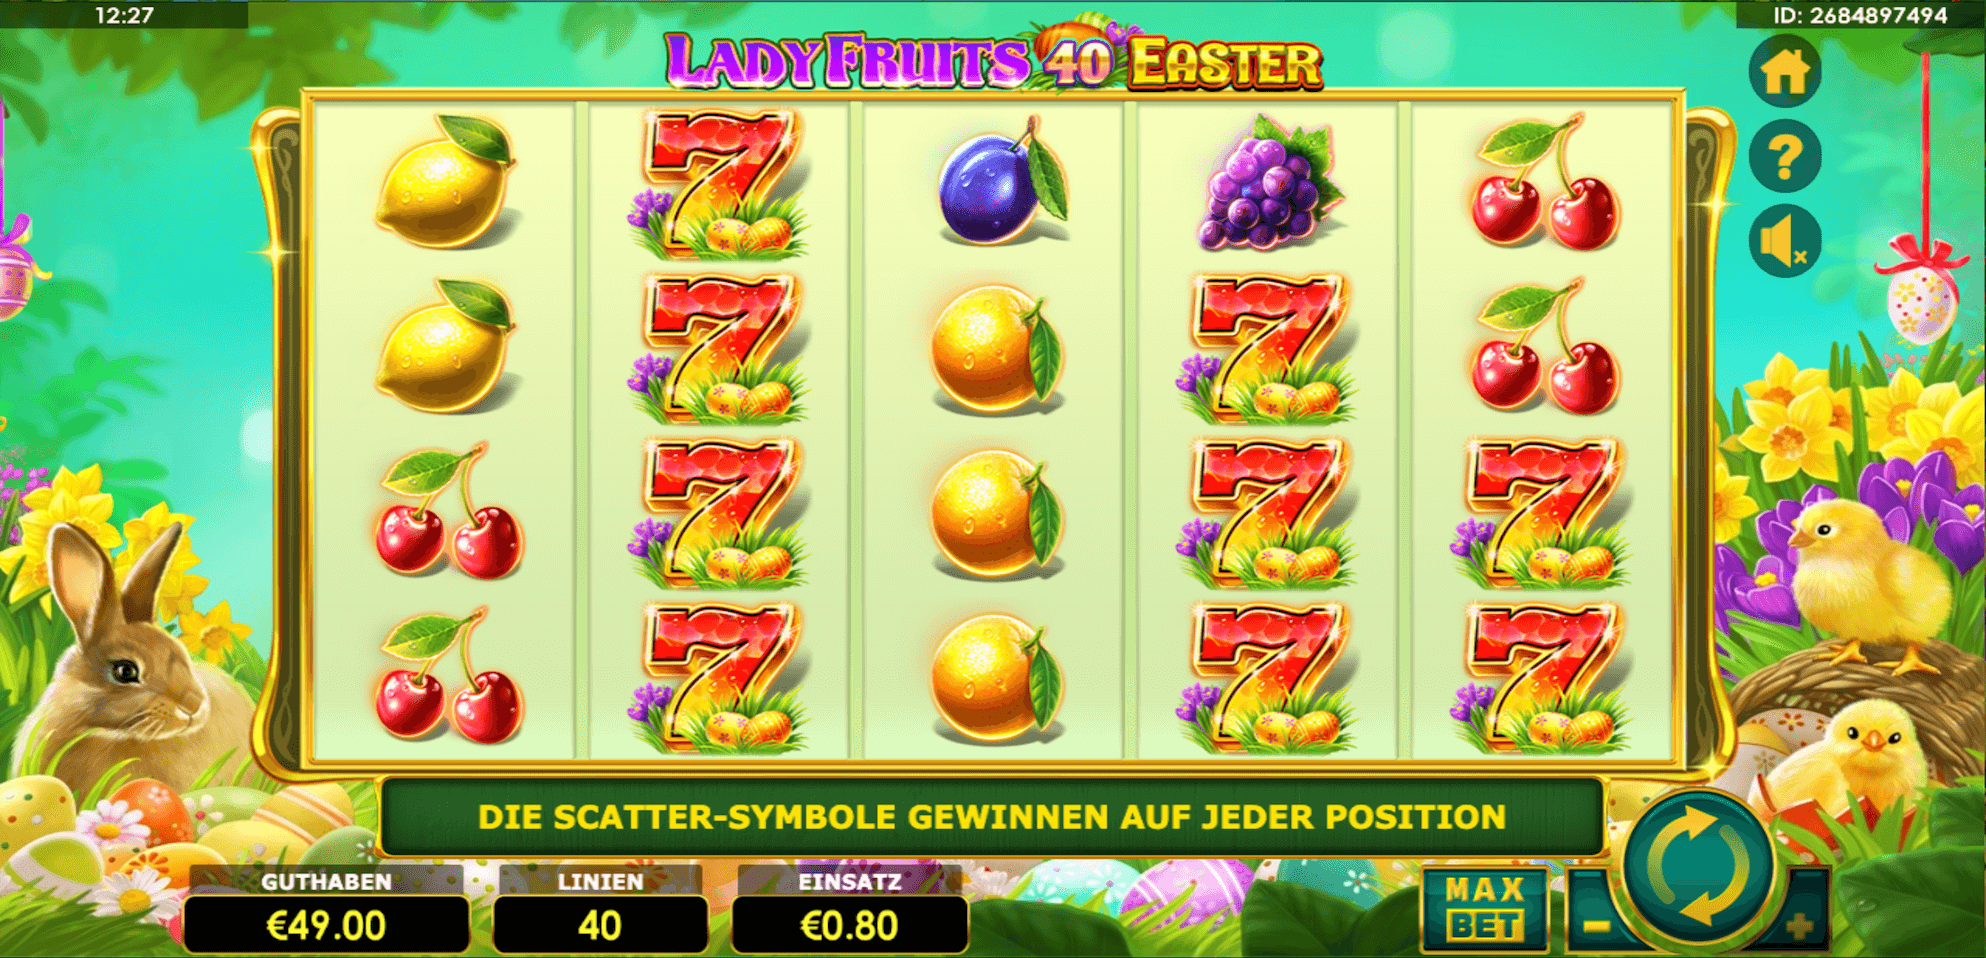 Die Oster Slot, Lady Fruits 40 Easter Edition